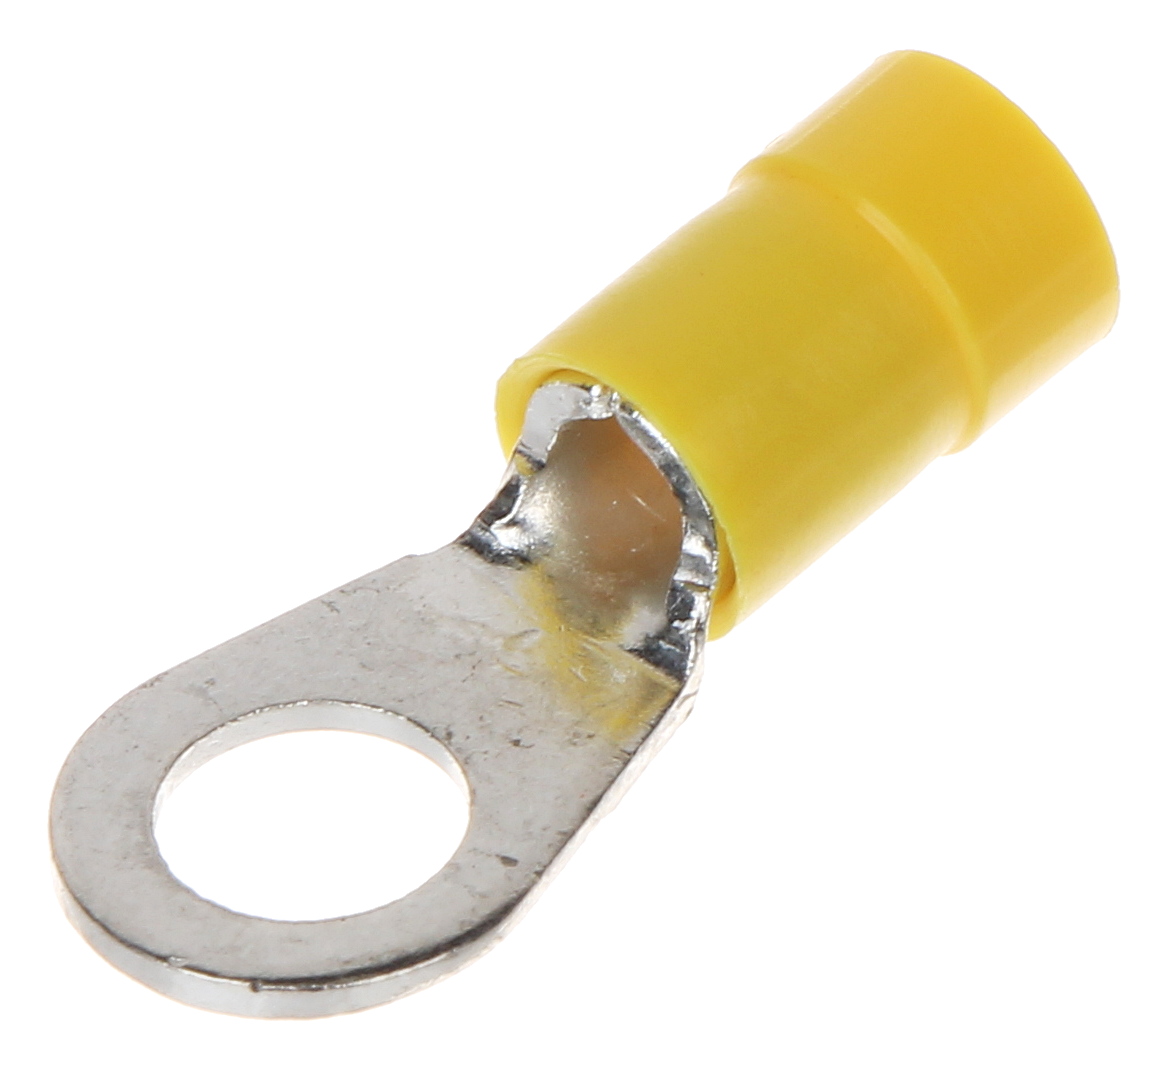 INSULATED RING TERMINAL KSIO-4.0-6.0/M6 - and - Delta